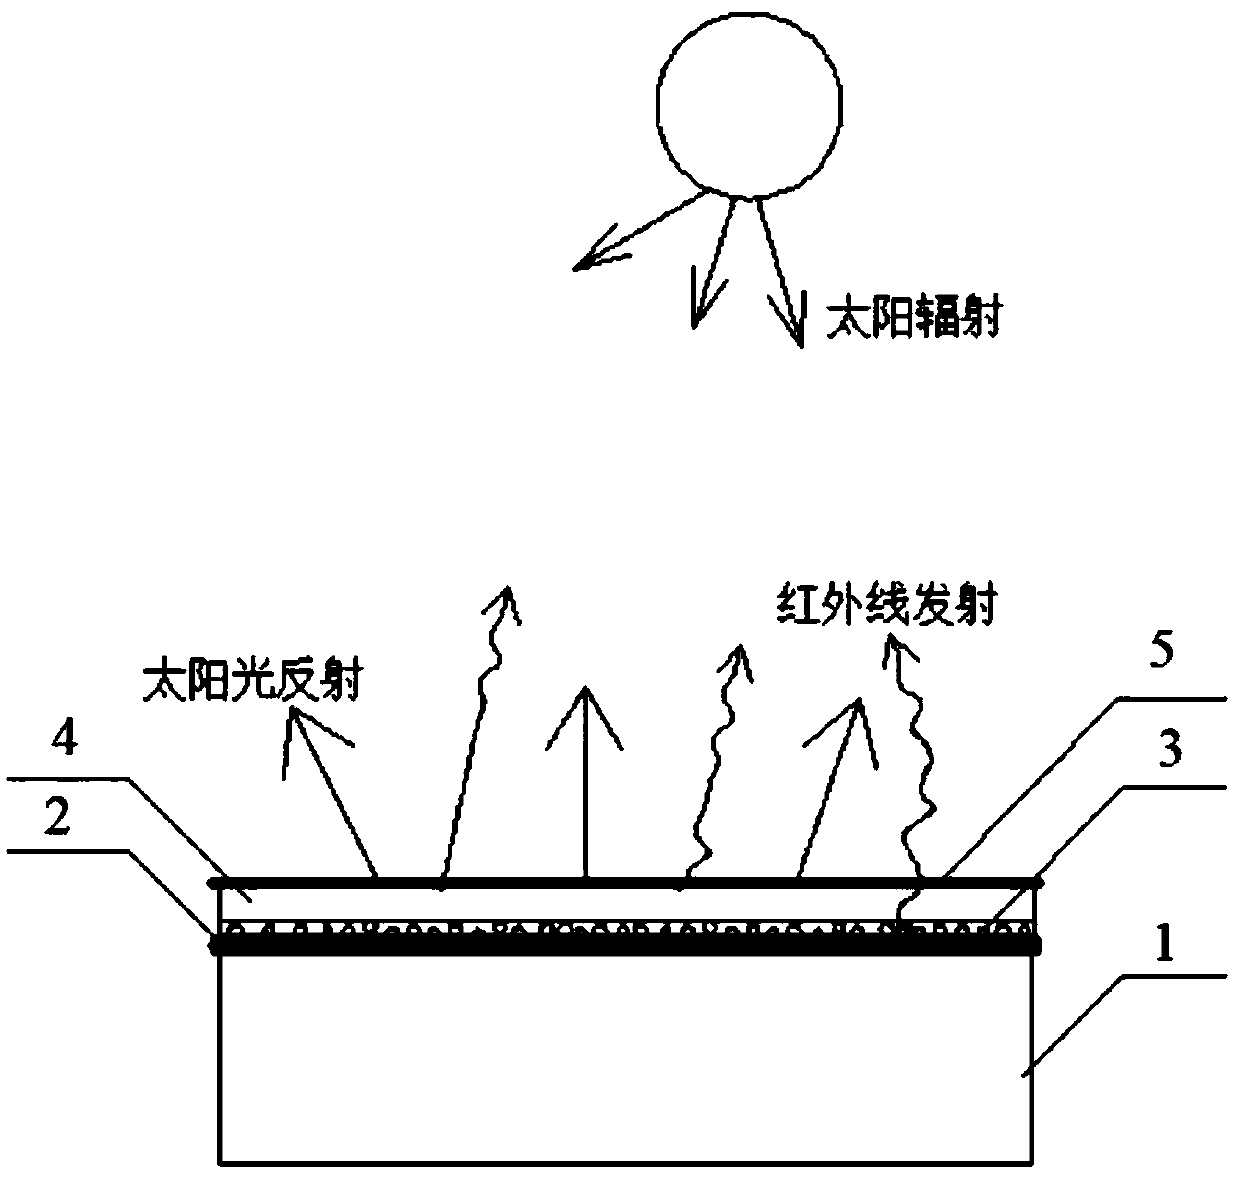 High-temperature-resistant high-infrared-emission passive radiation cooling structure and cooling method